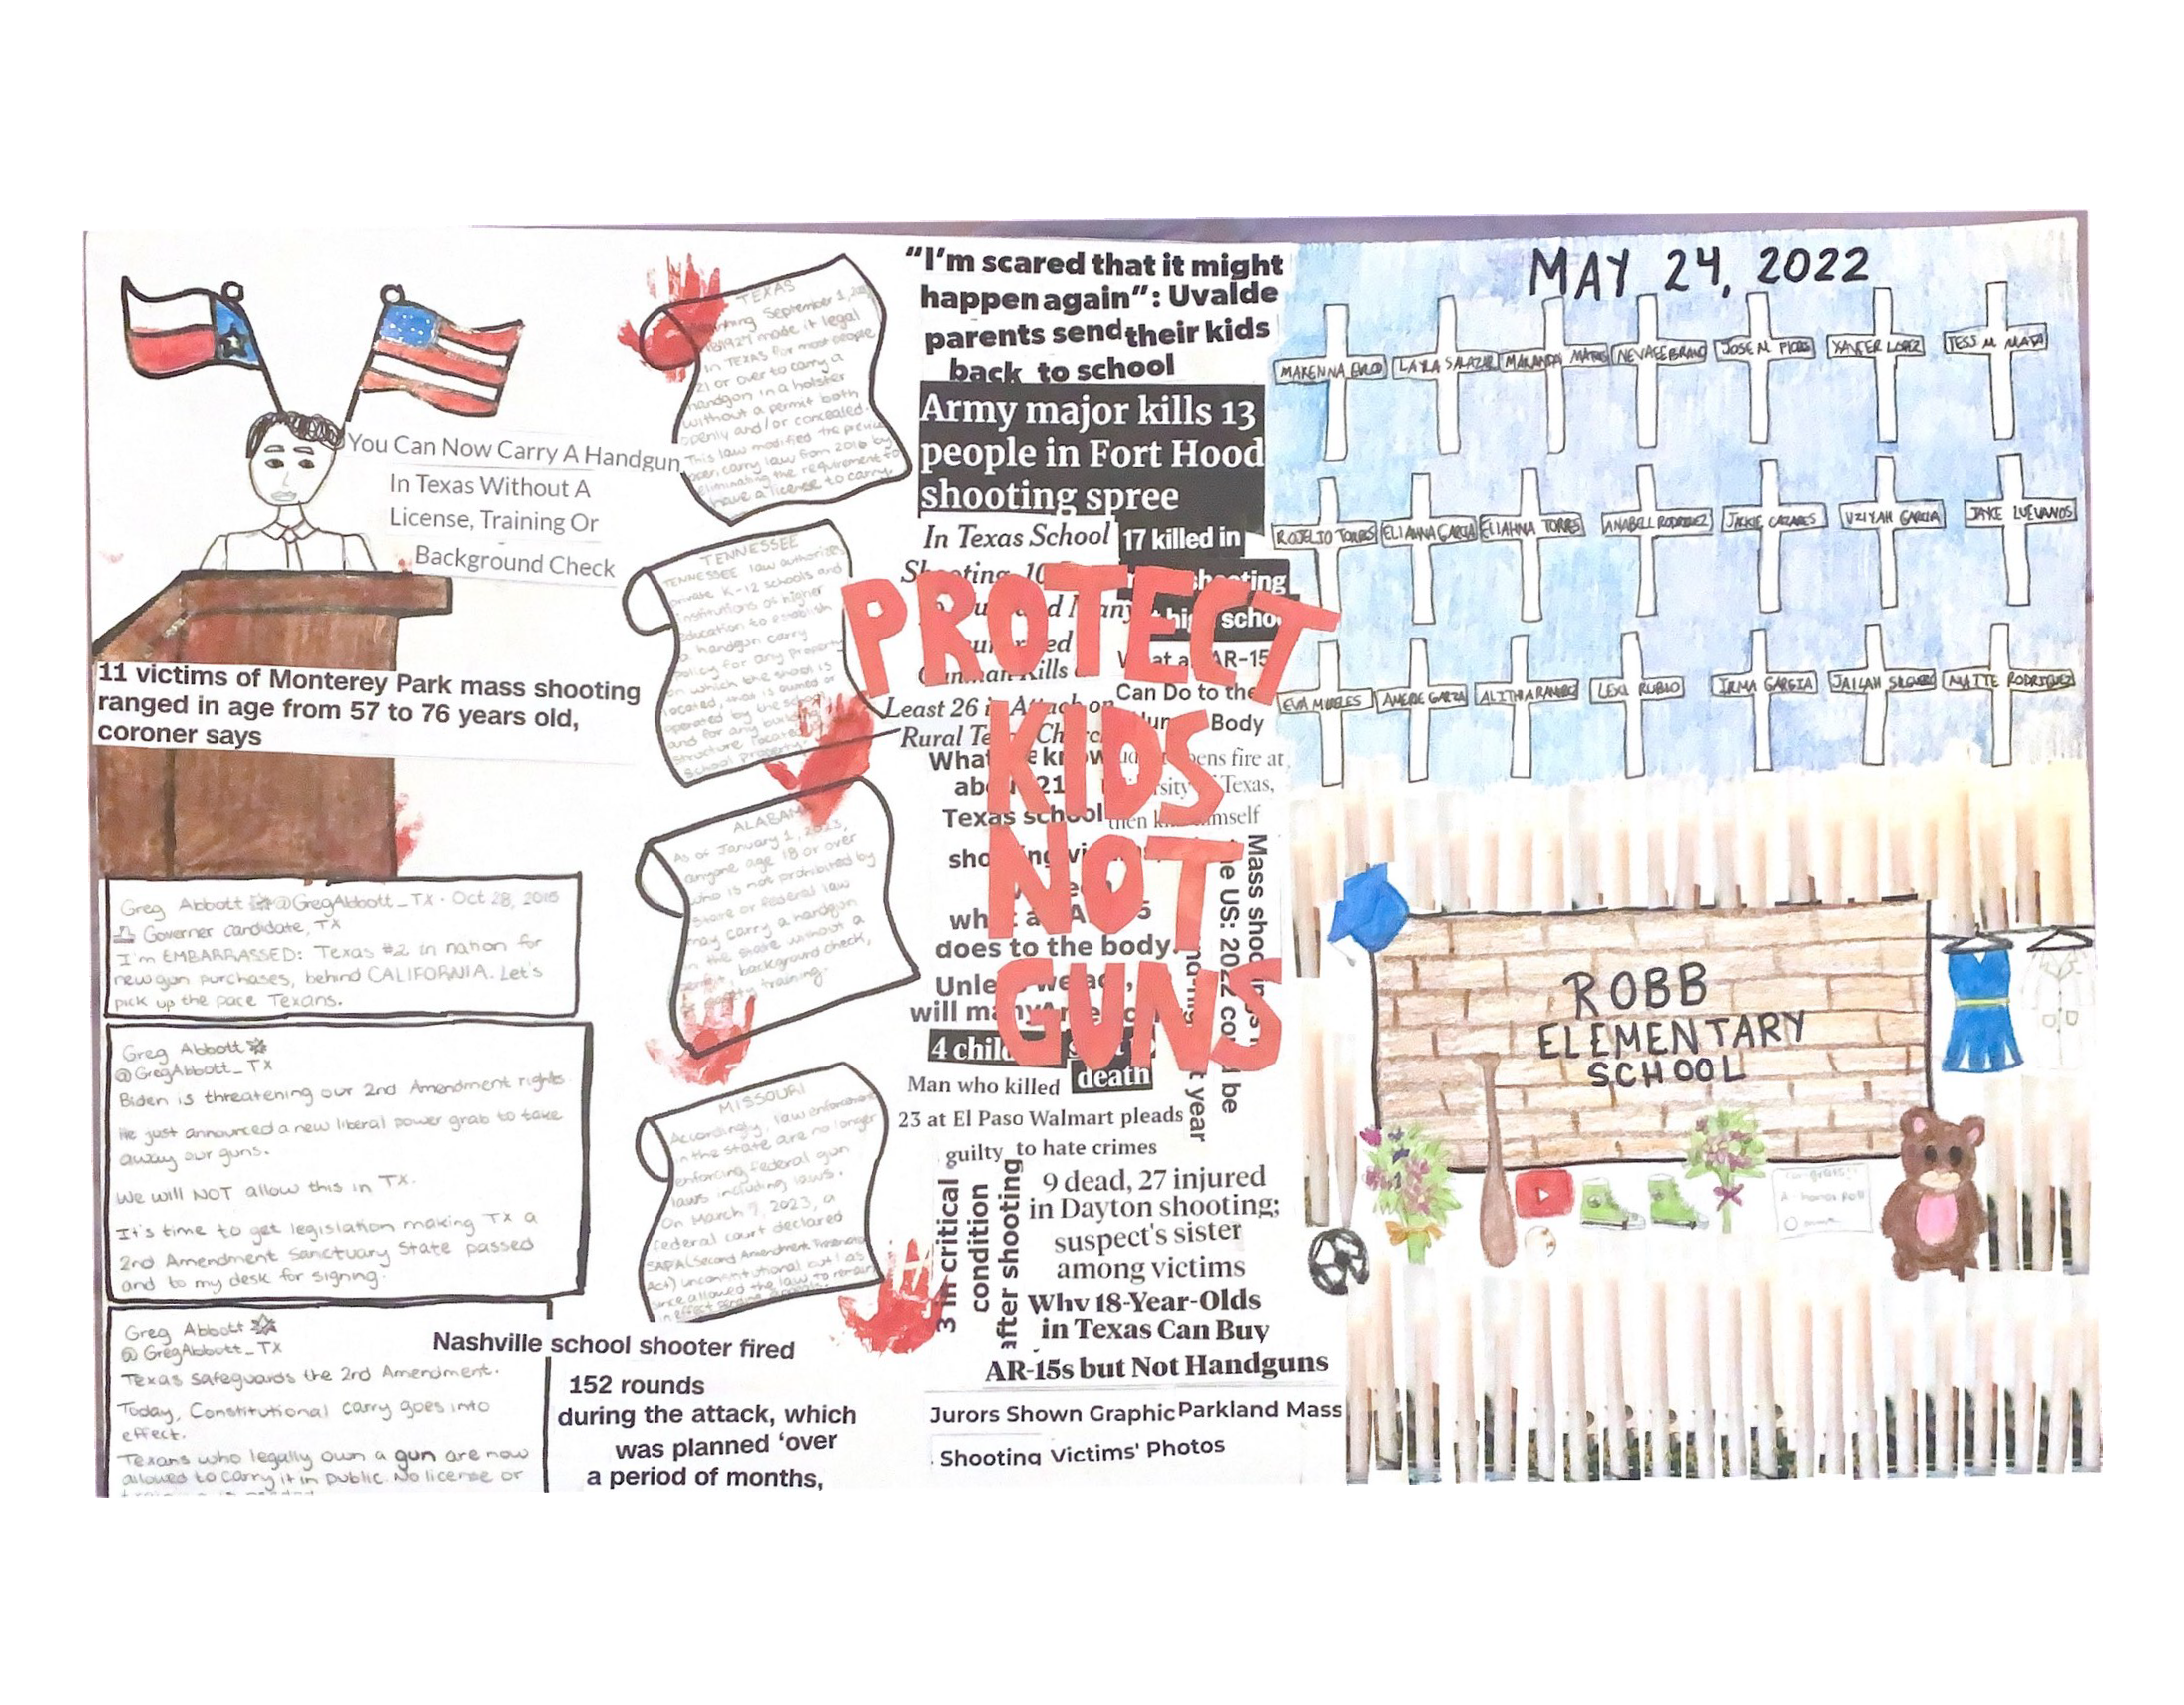 Visual Presentation by Areli Robles and Pricila Torres The project Name is Protect Kids Not Guns